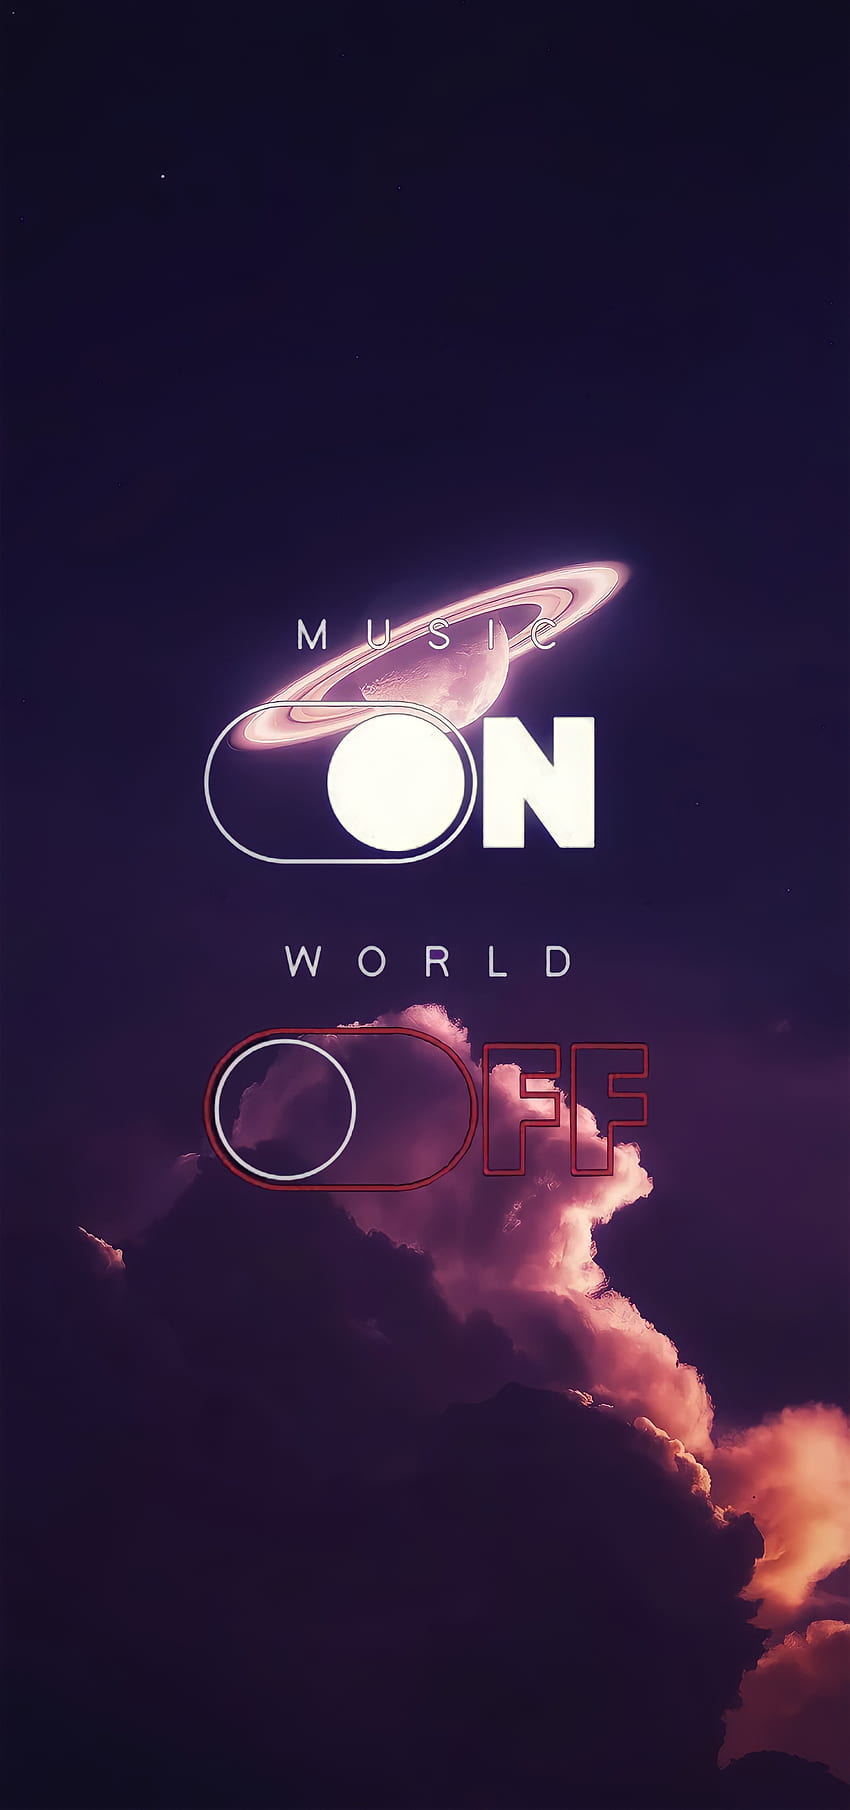 Music on world off, atmosphere HD phone wallpaper